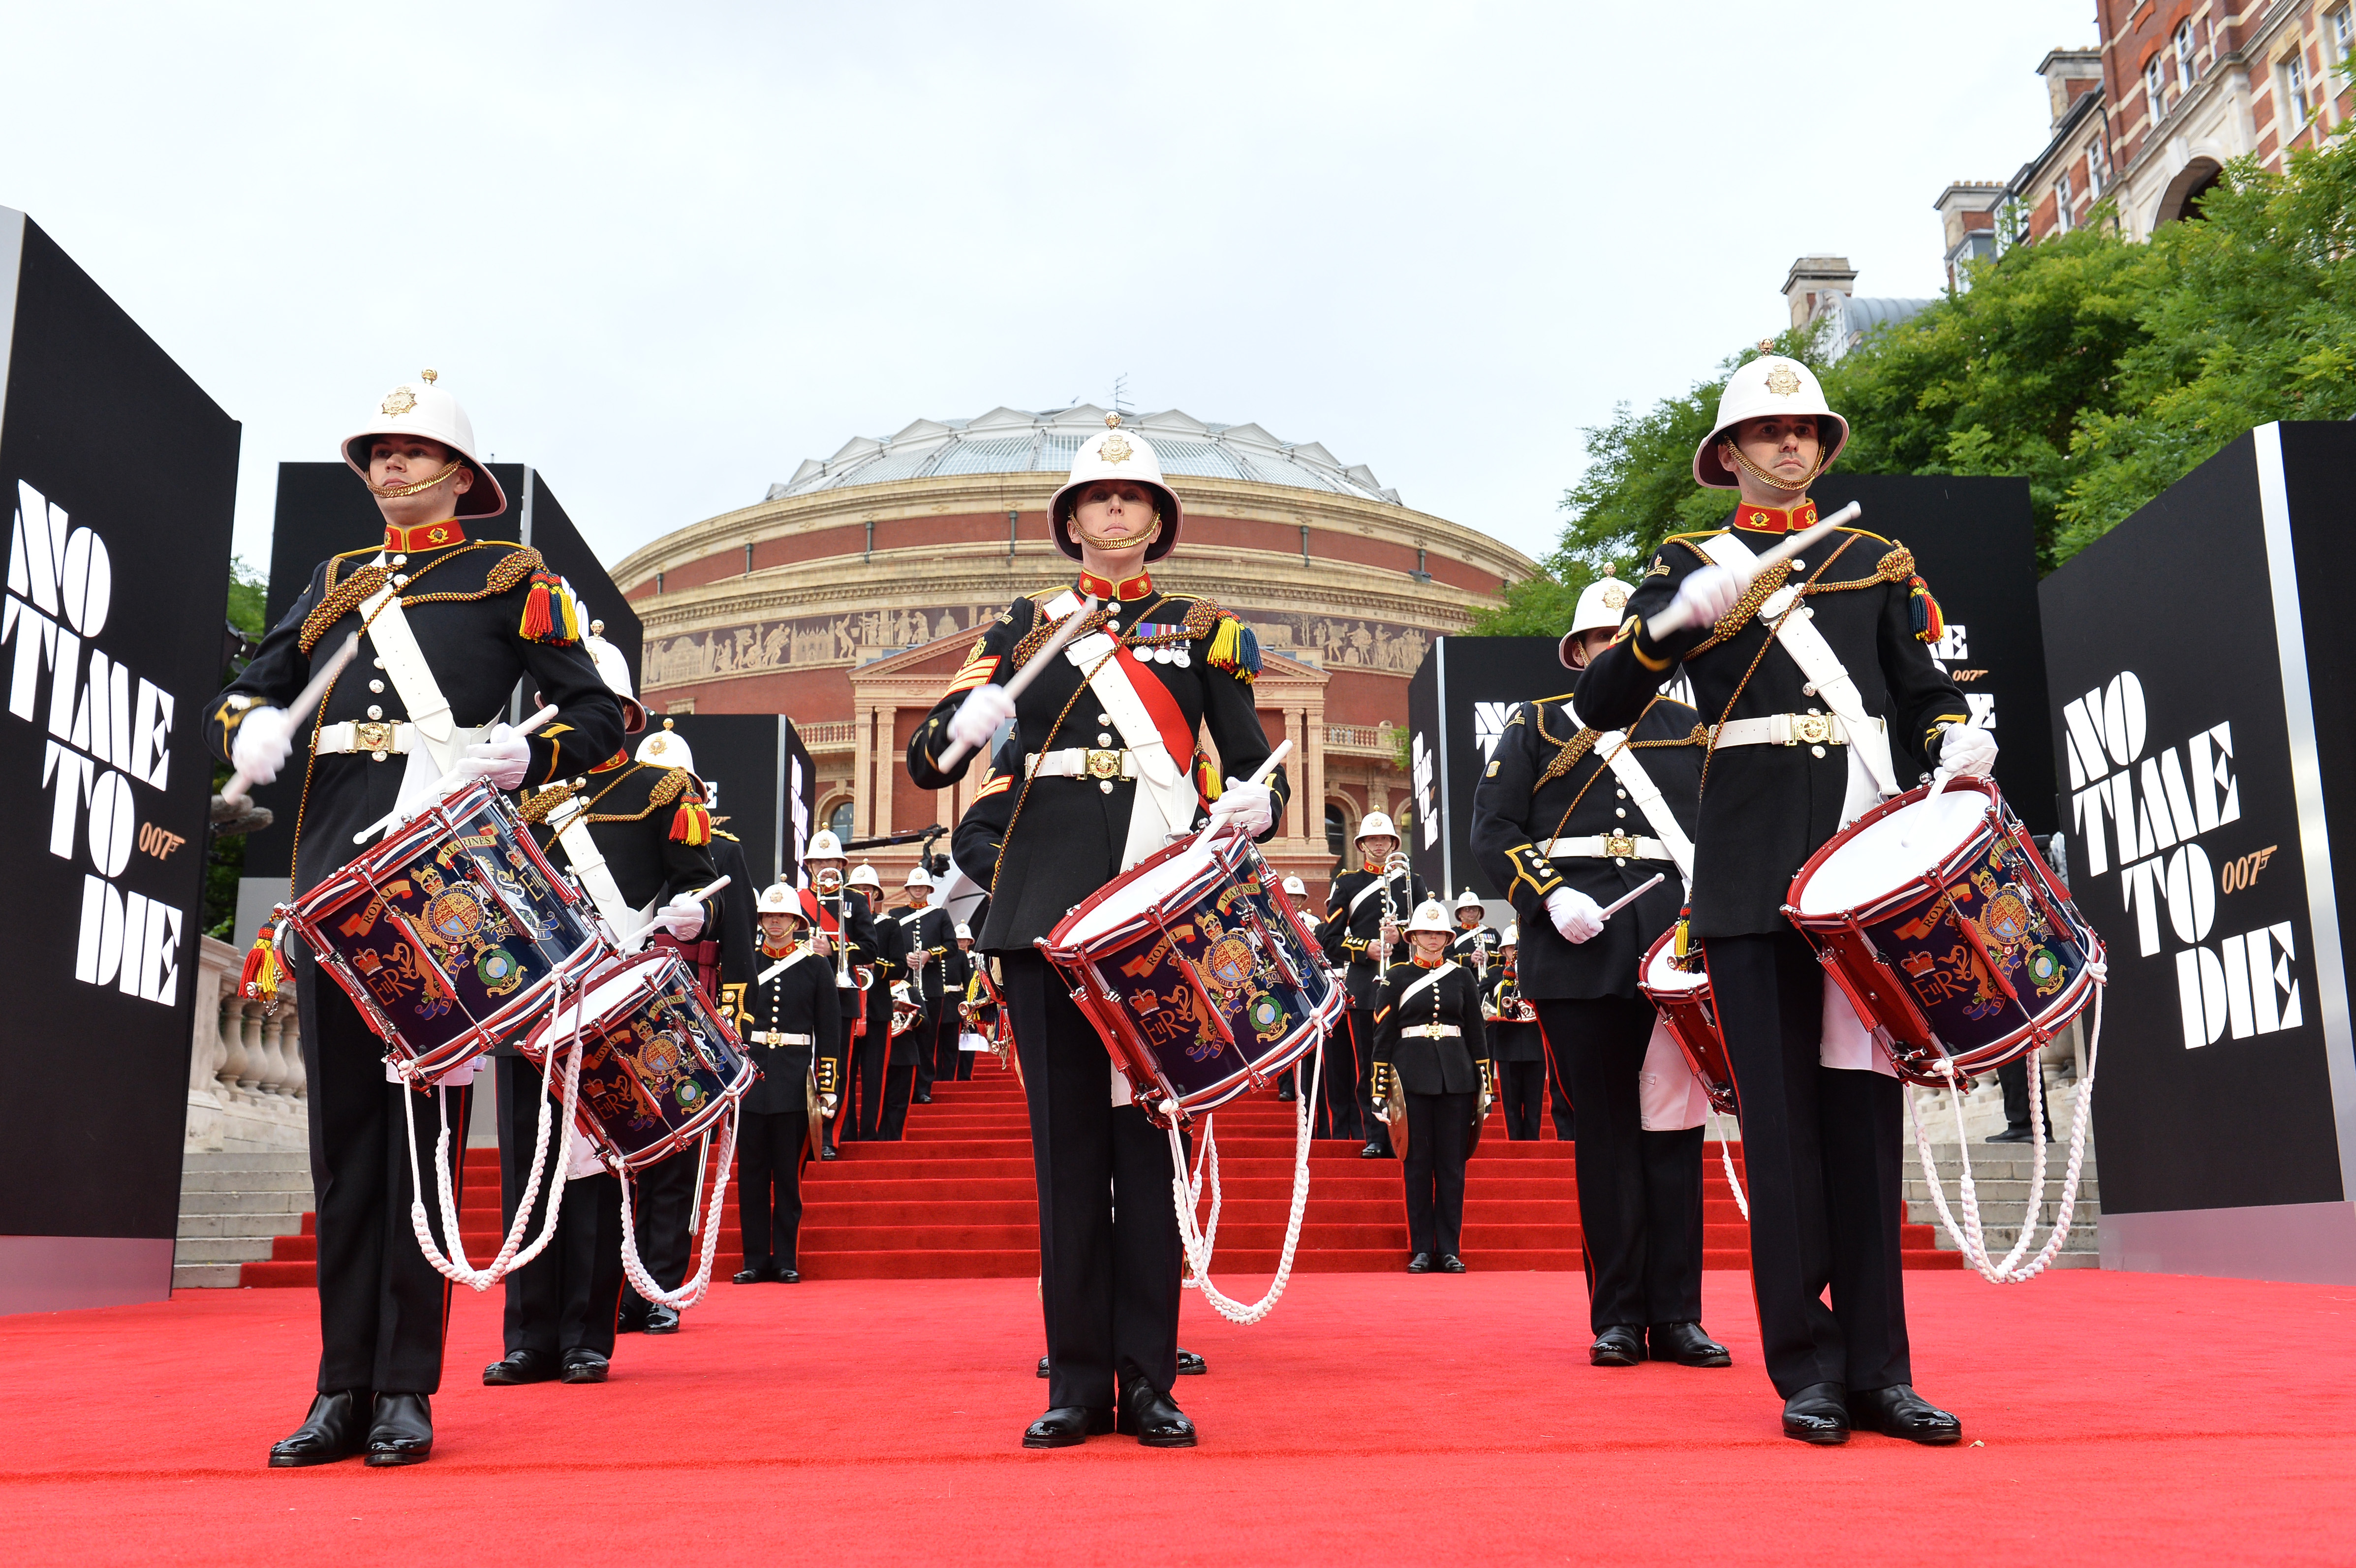 Military Band on the red carpet.